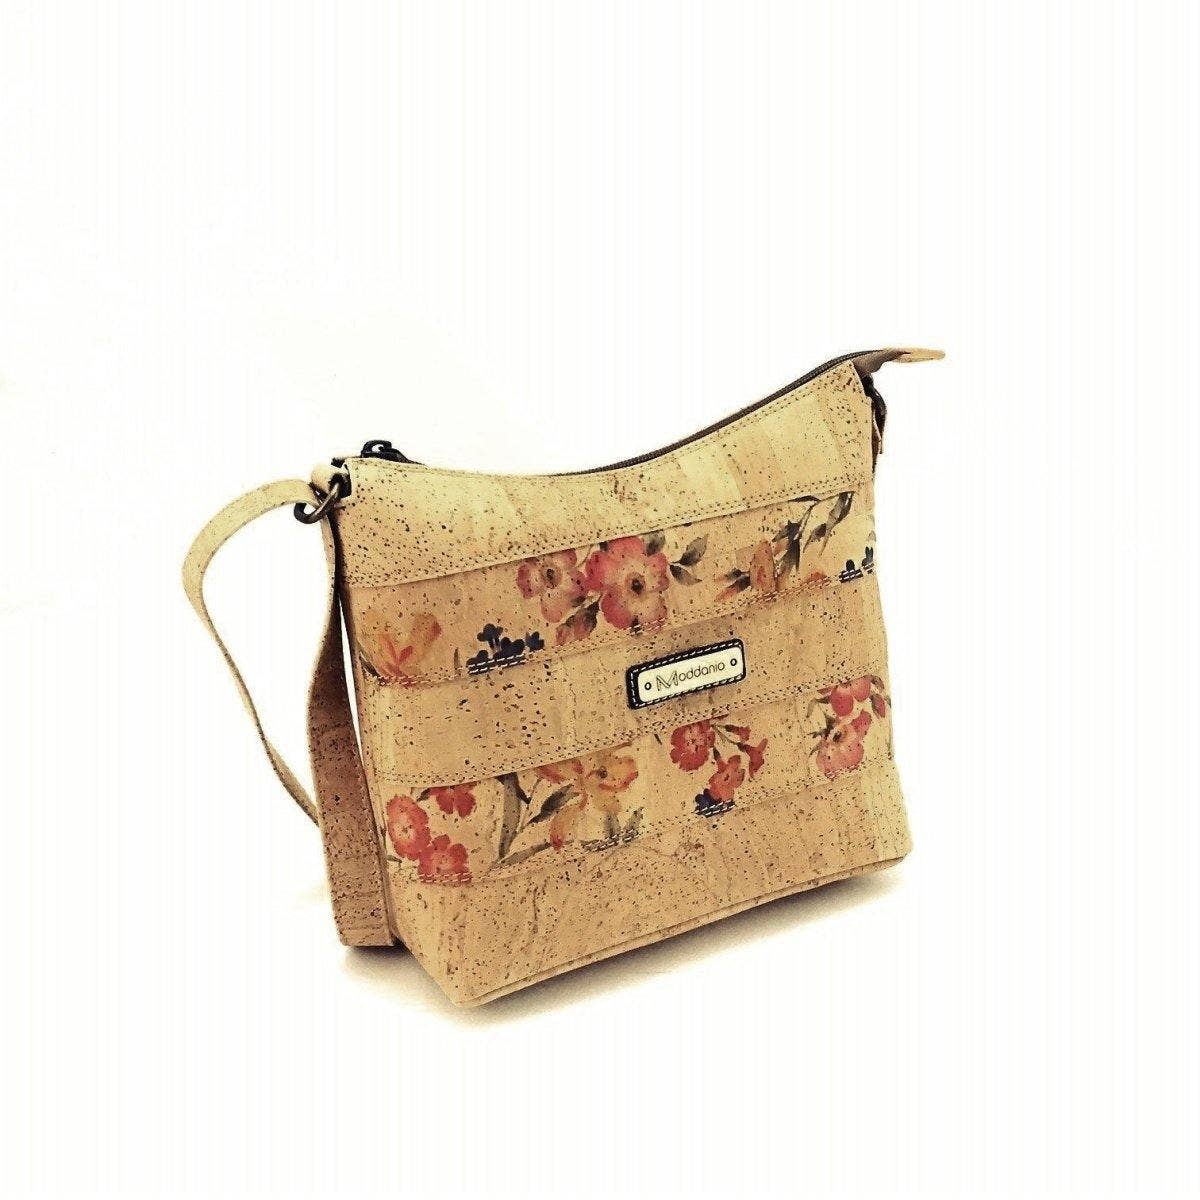 Cork Crossbody Bag and Vegan Purse for Women in Red Floral